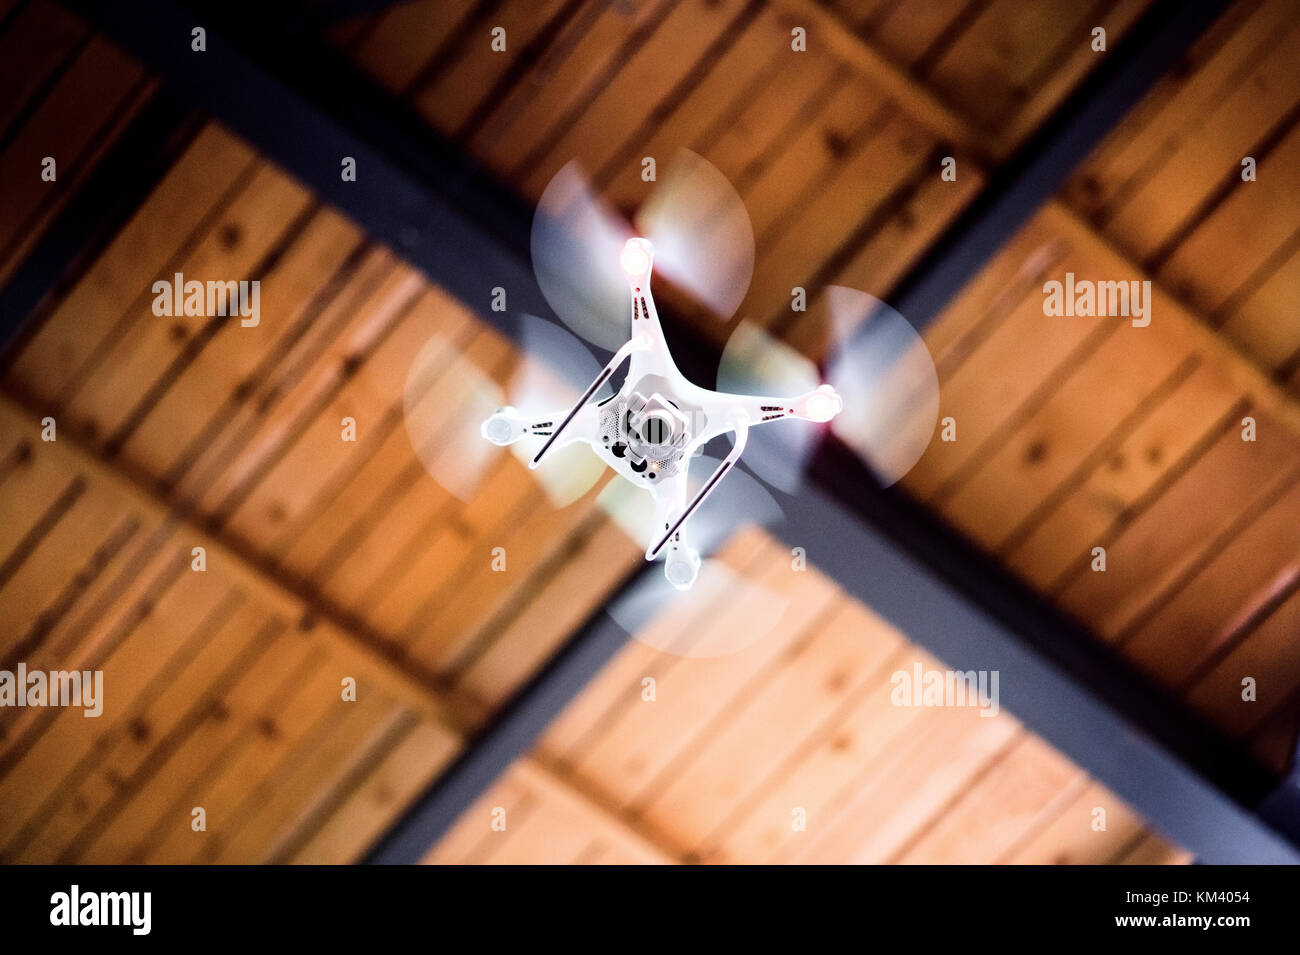 White drone flying inside the building. Stock Photo